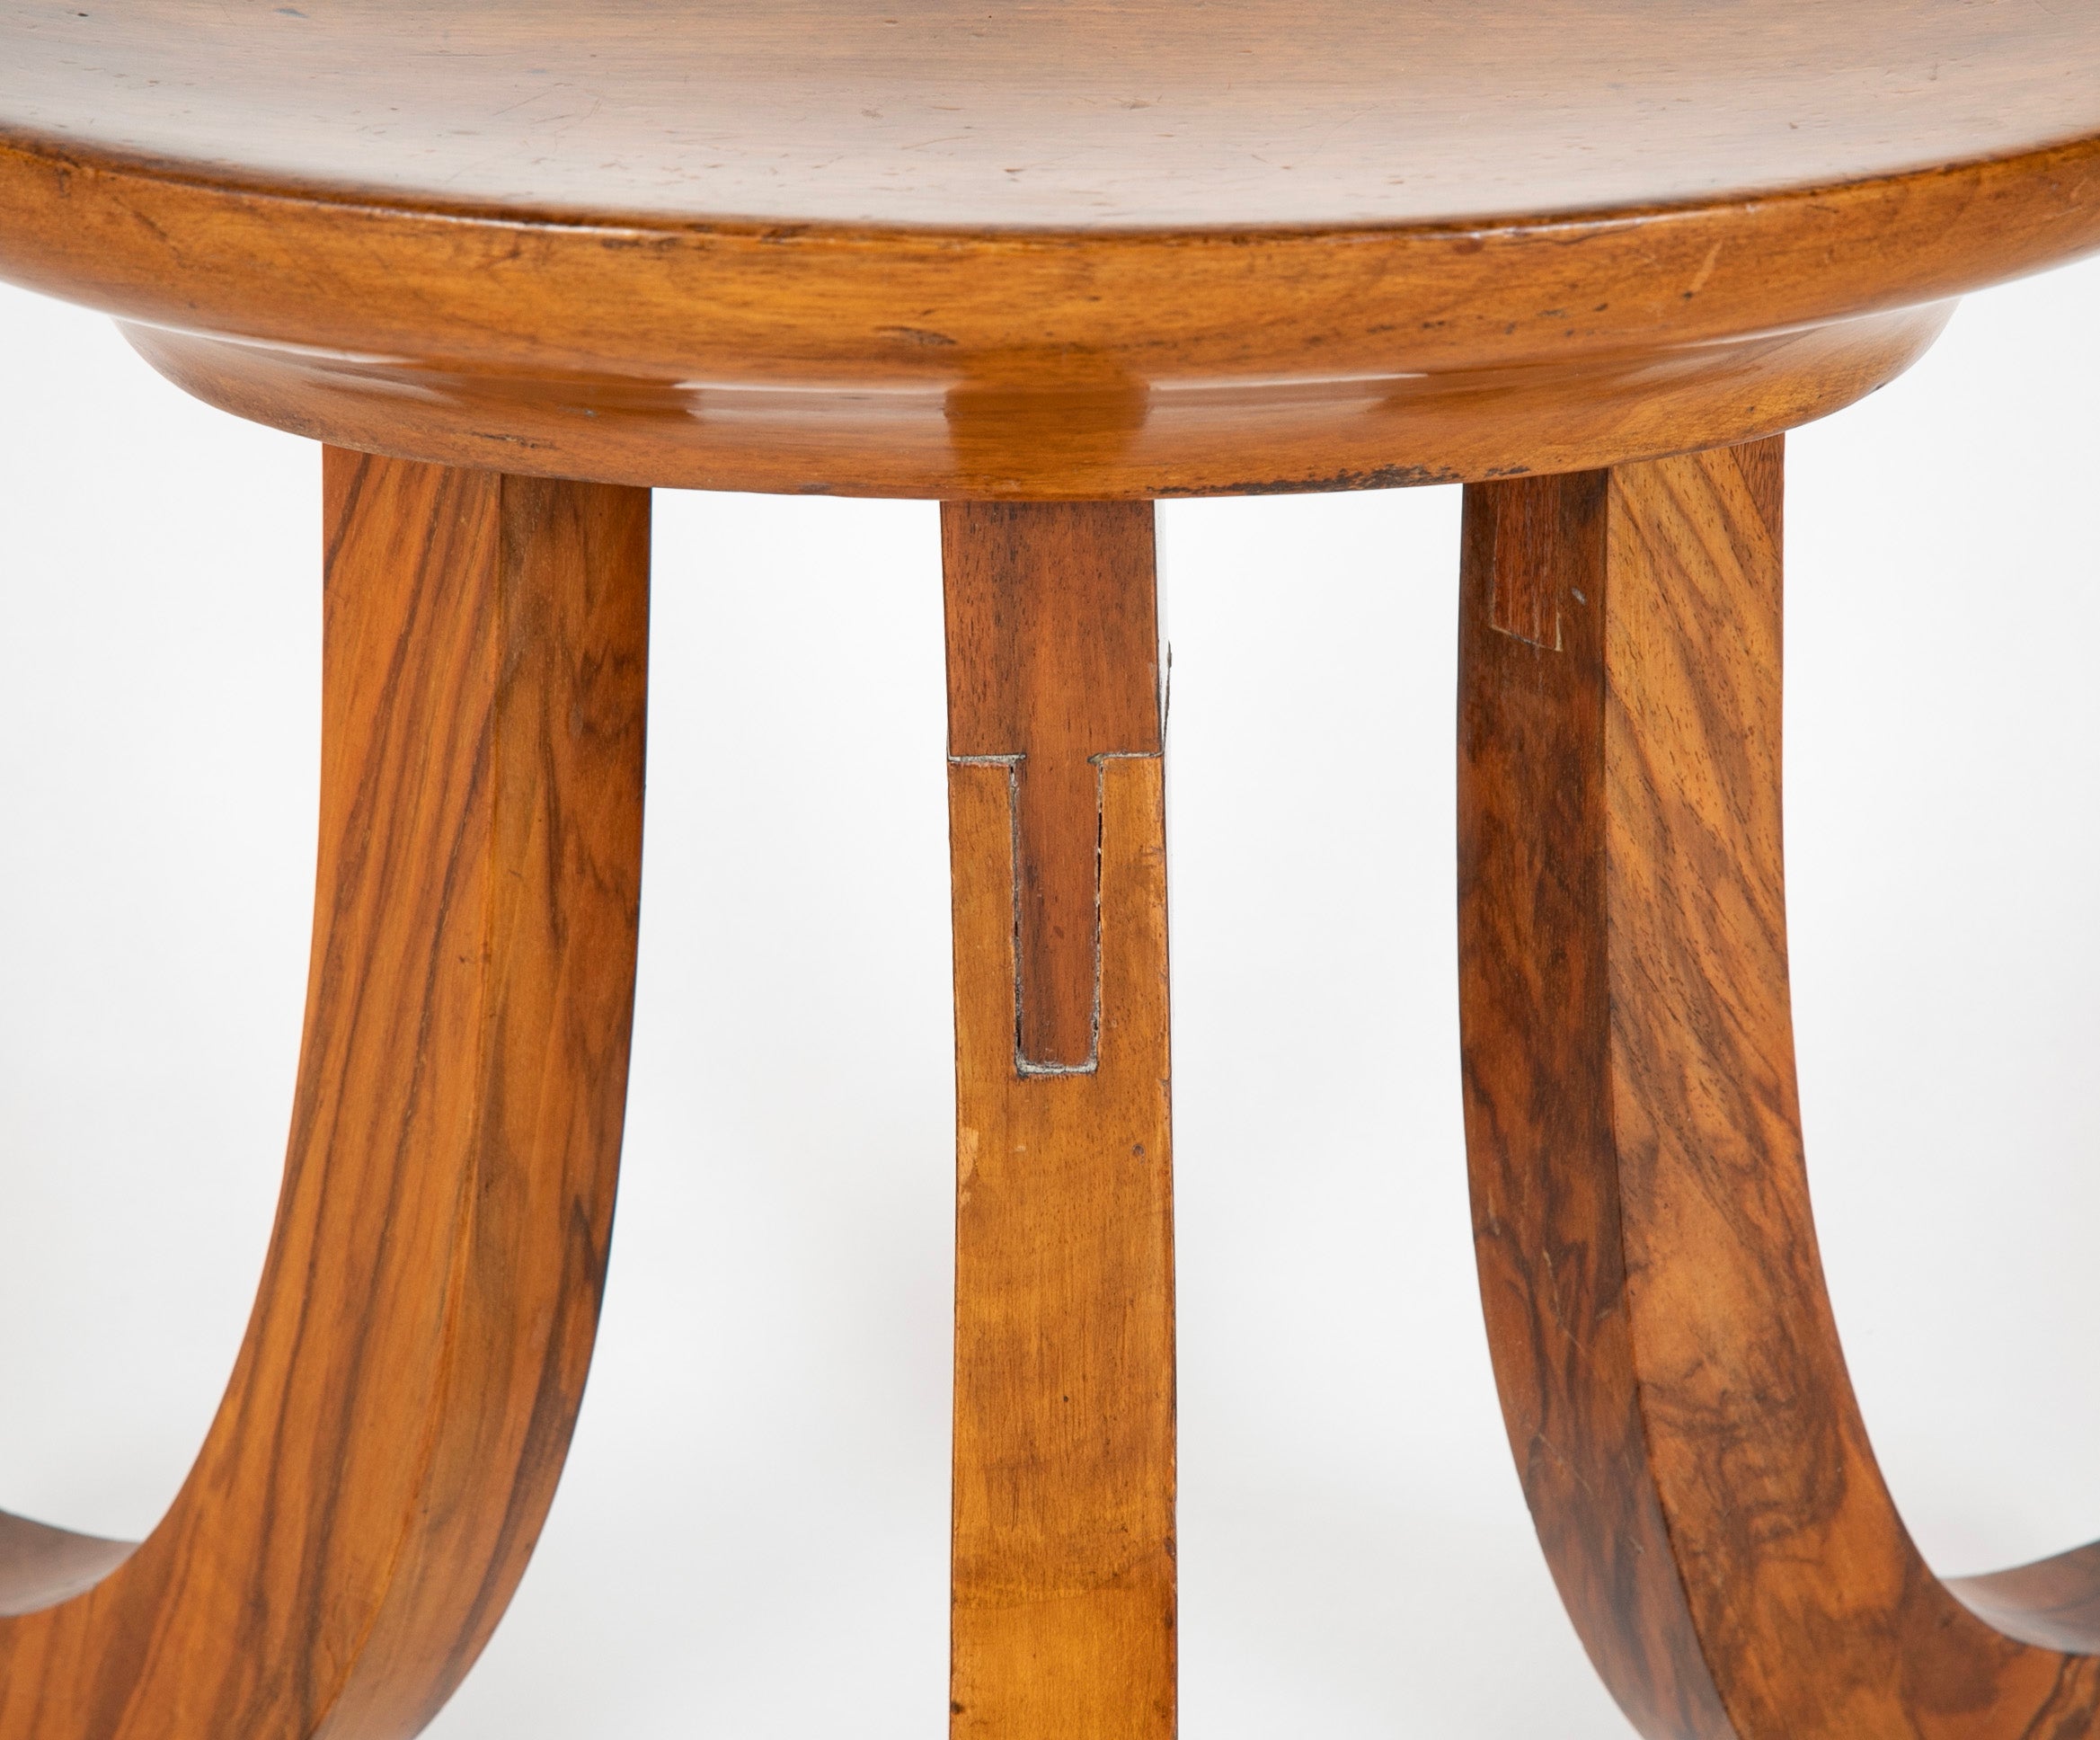 Pair of Walnut Tripod Thebes Stools in the Manner of Liberty & Co.